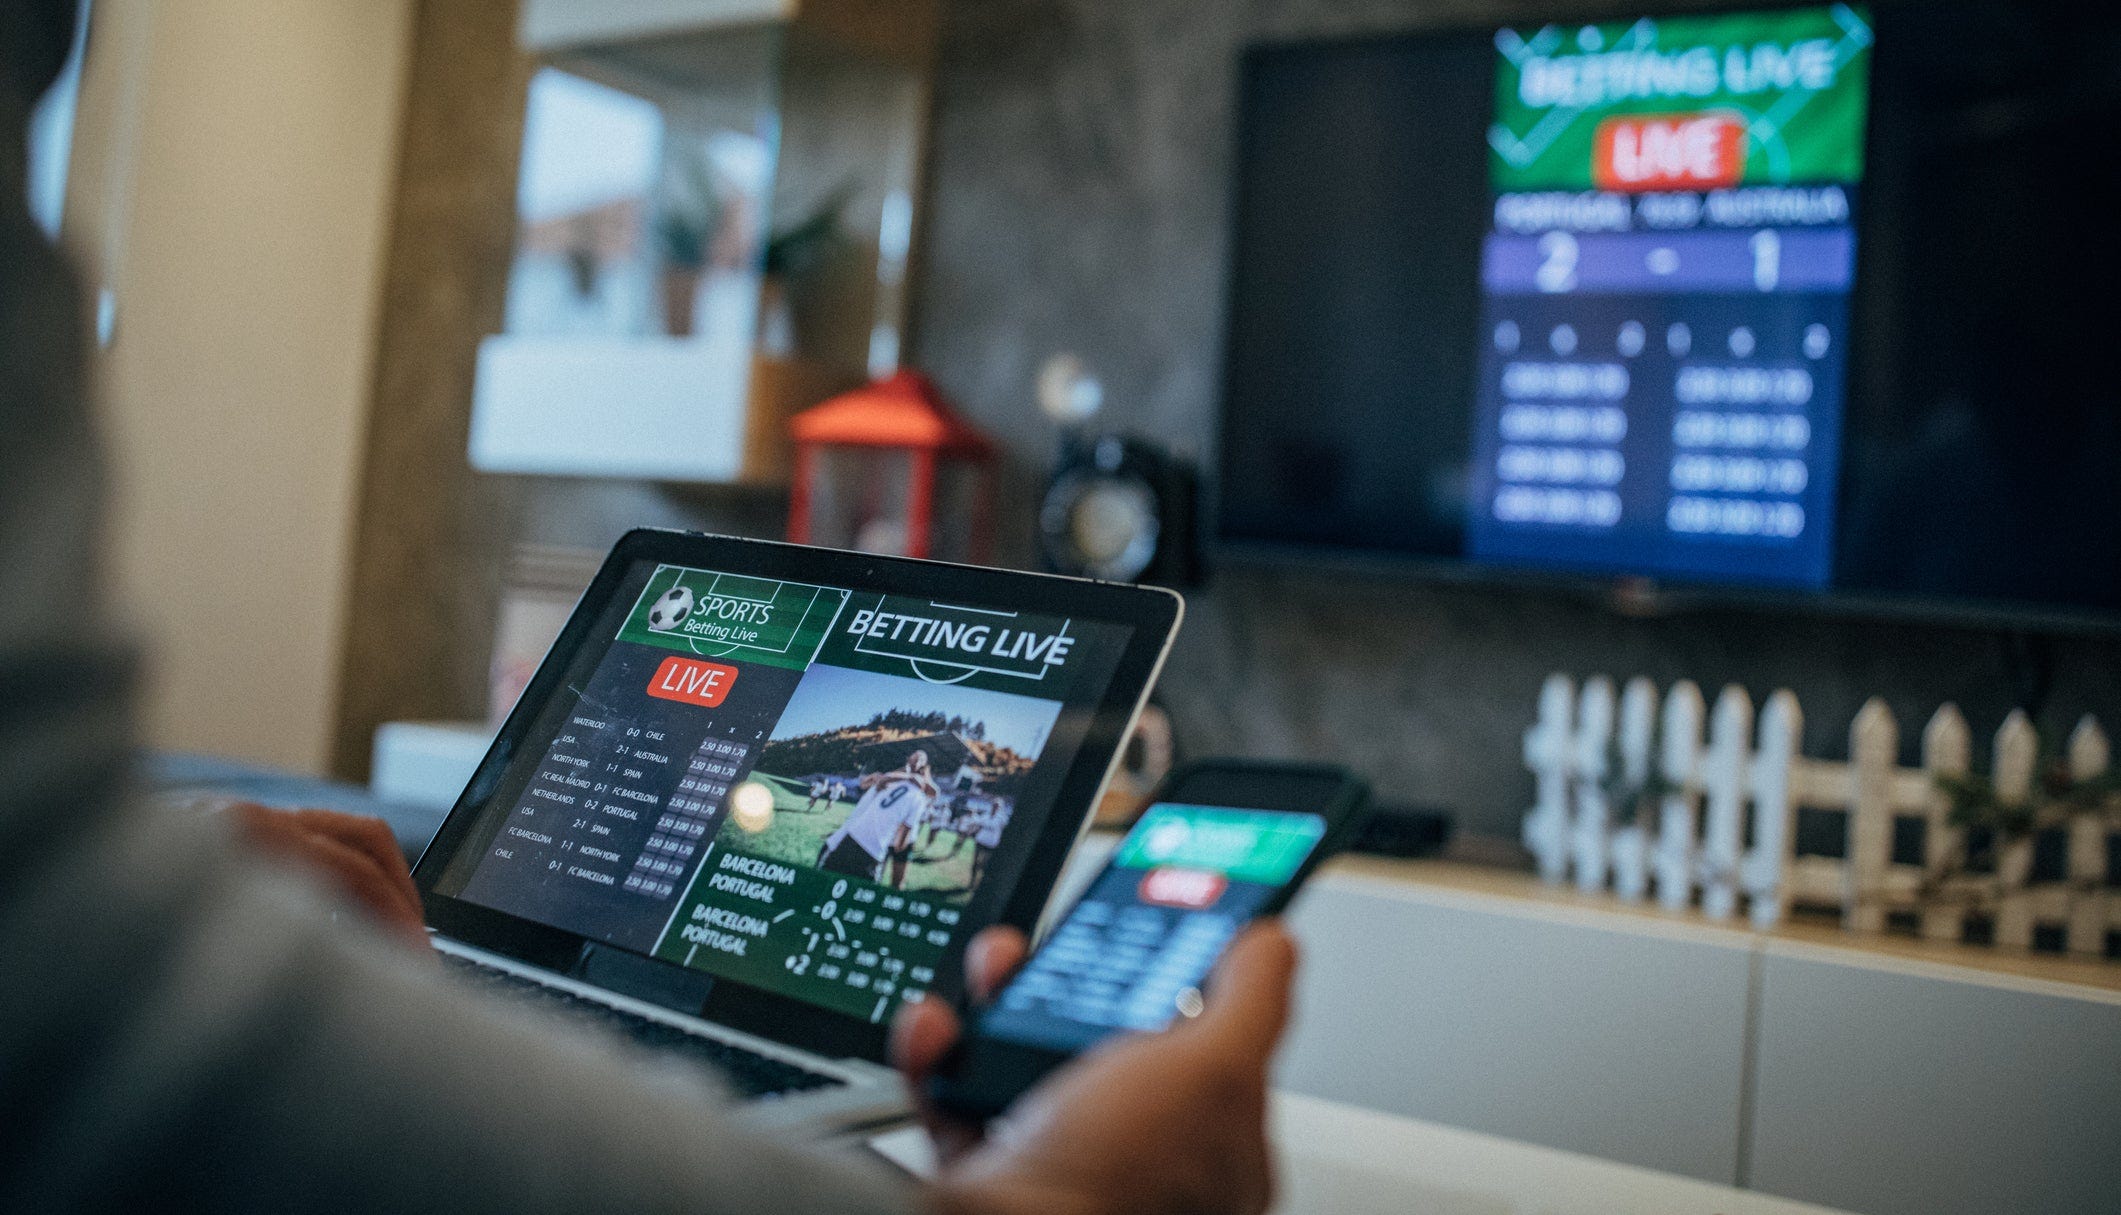    
Will Sports Betting Transform How Games Are Watched
